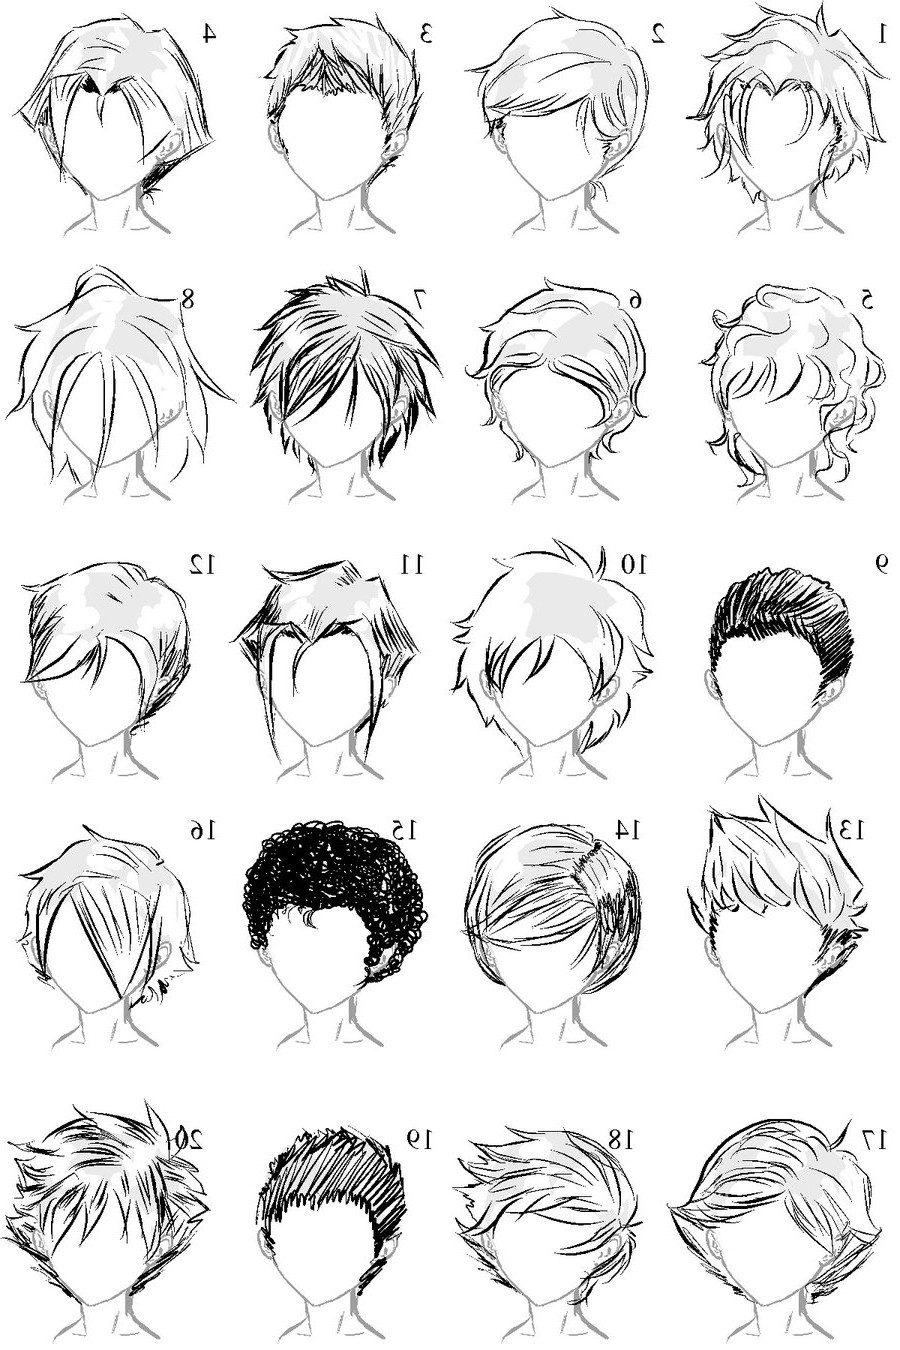 Anime Men Hairstyles
 Male Anime Hairstyles Drawing at PaintingValley